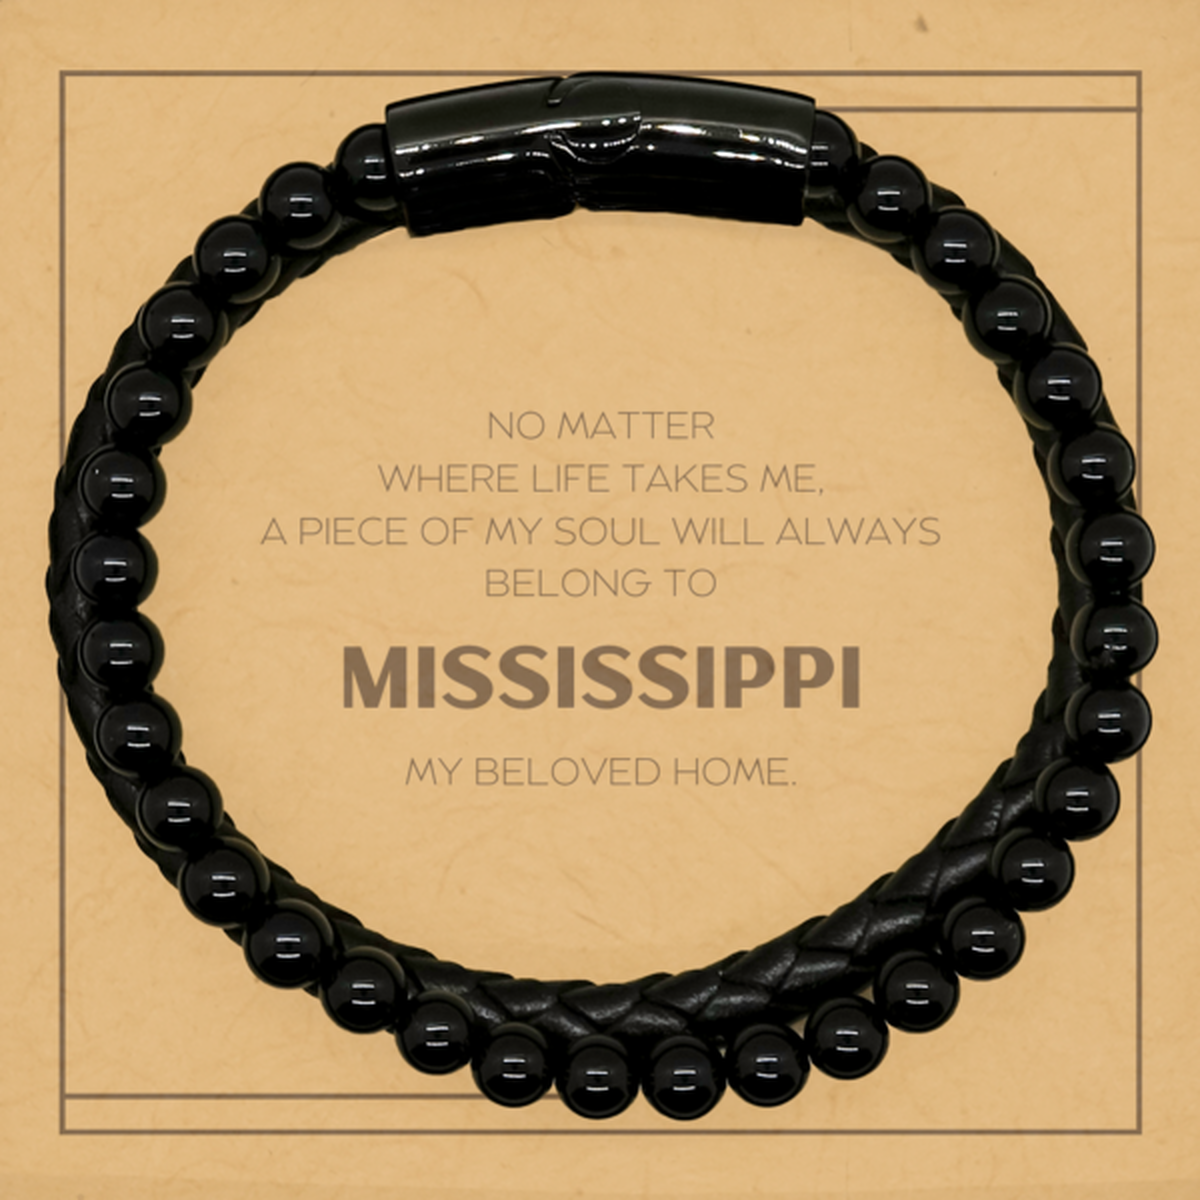 Love Mississippi State Gifts, My soul will always belong to Mississippi, Proud Stone Leather Bracelets, Birthday Unique Gifts For Mississippi Men, Women, Friends